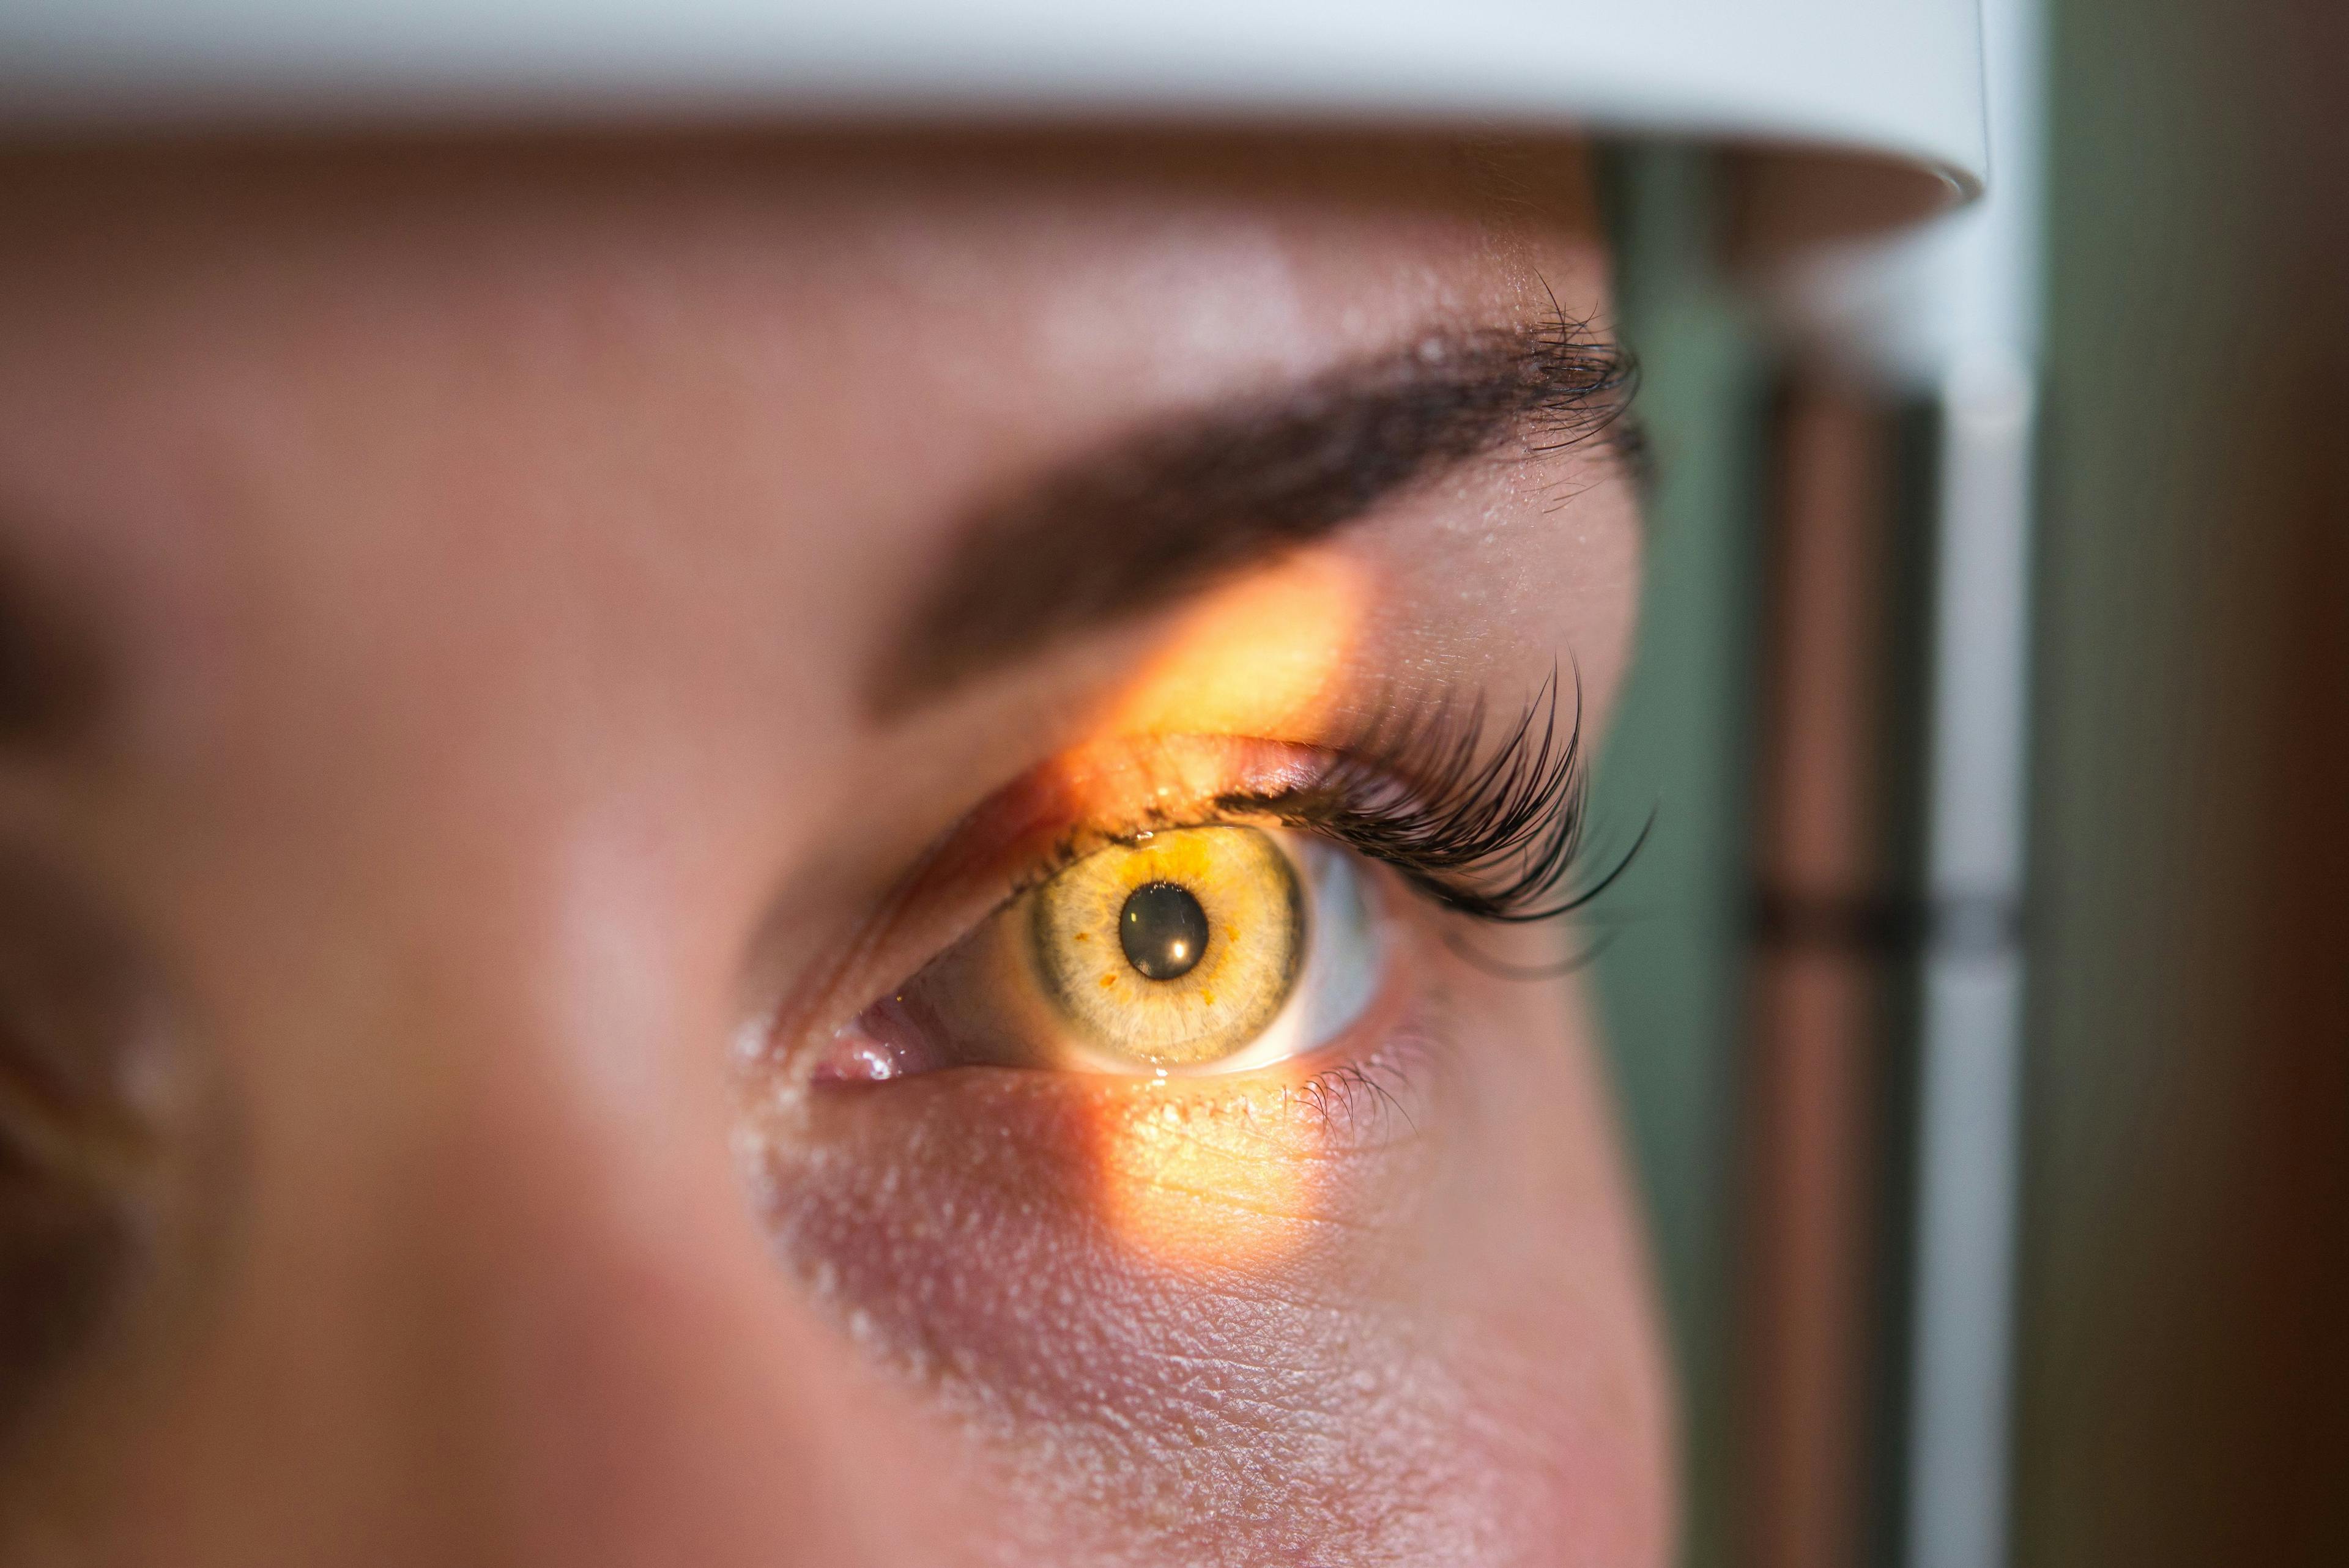 Investigators get to the root of ocular infections